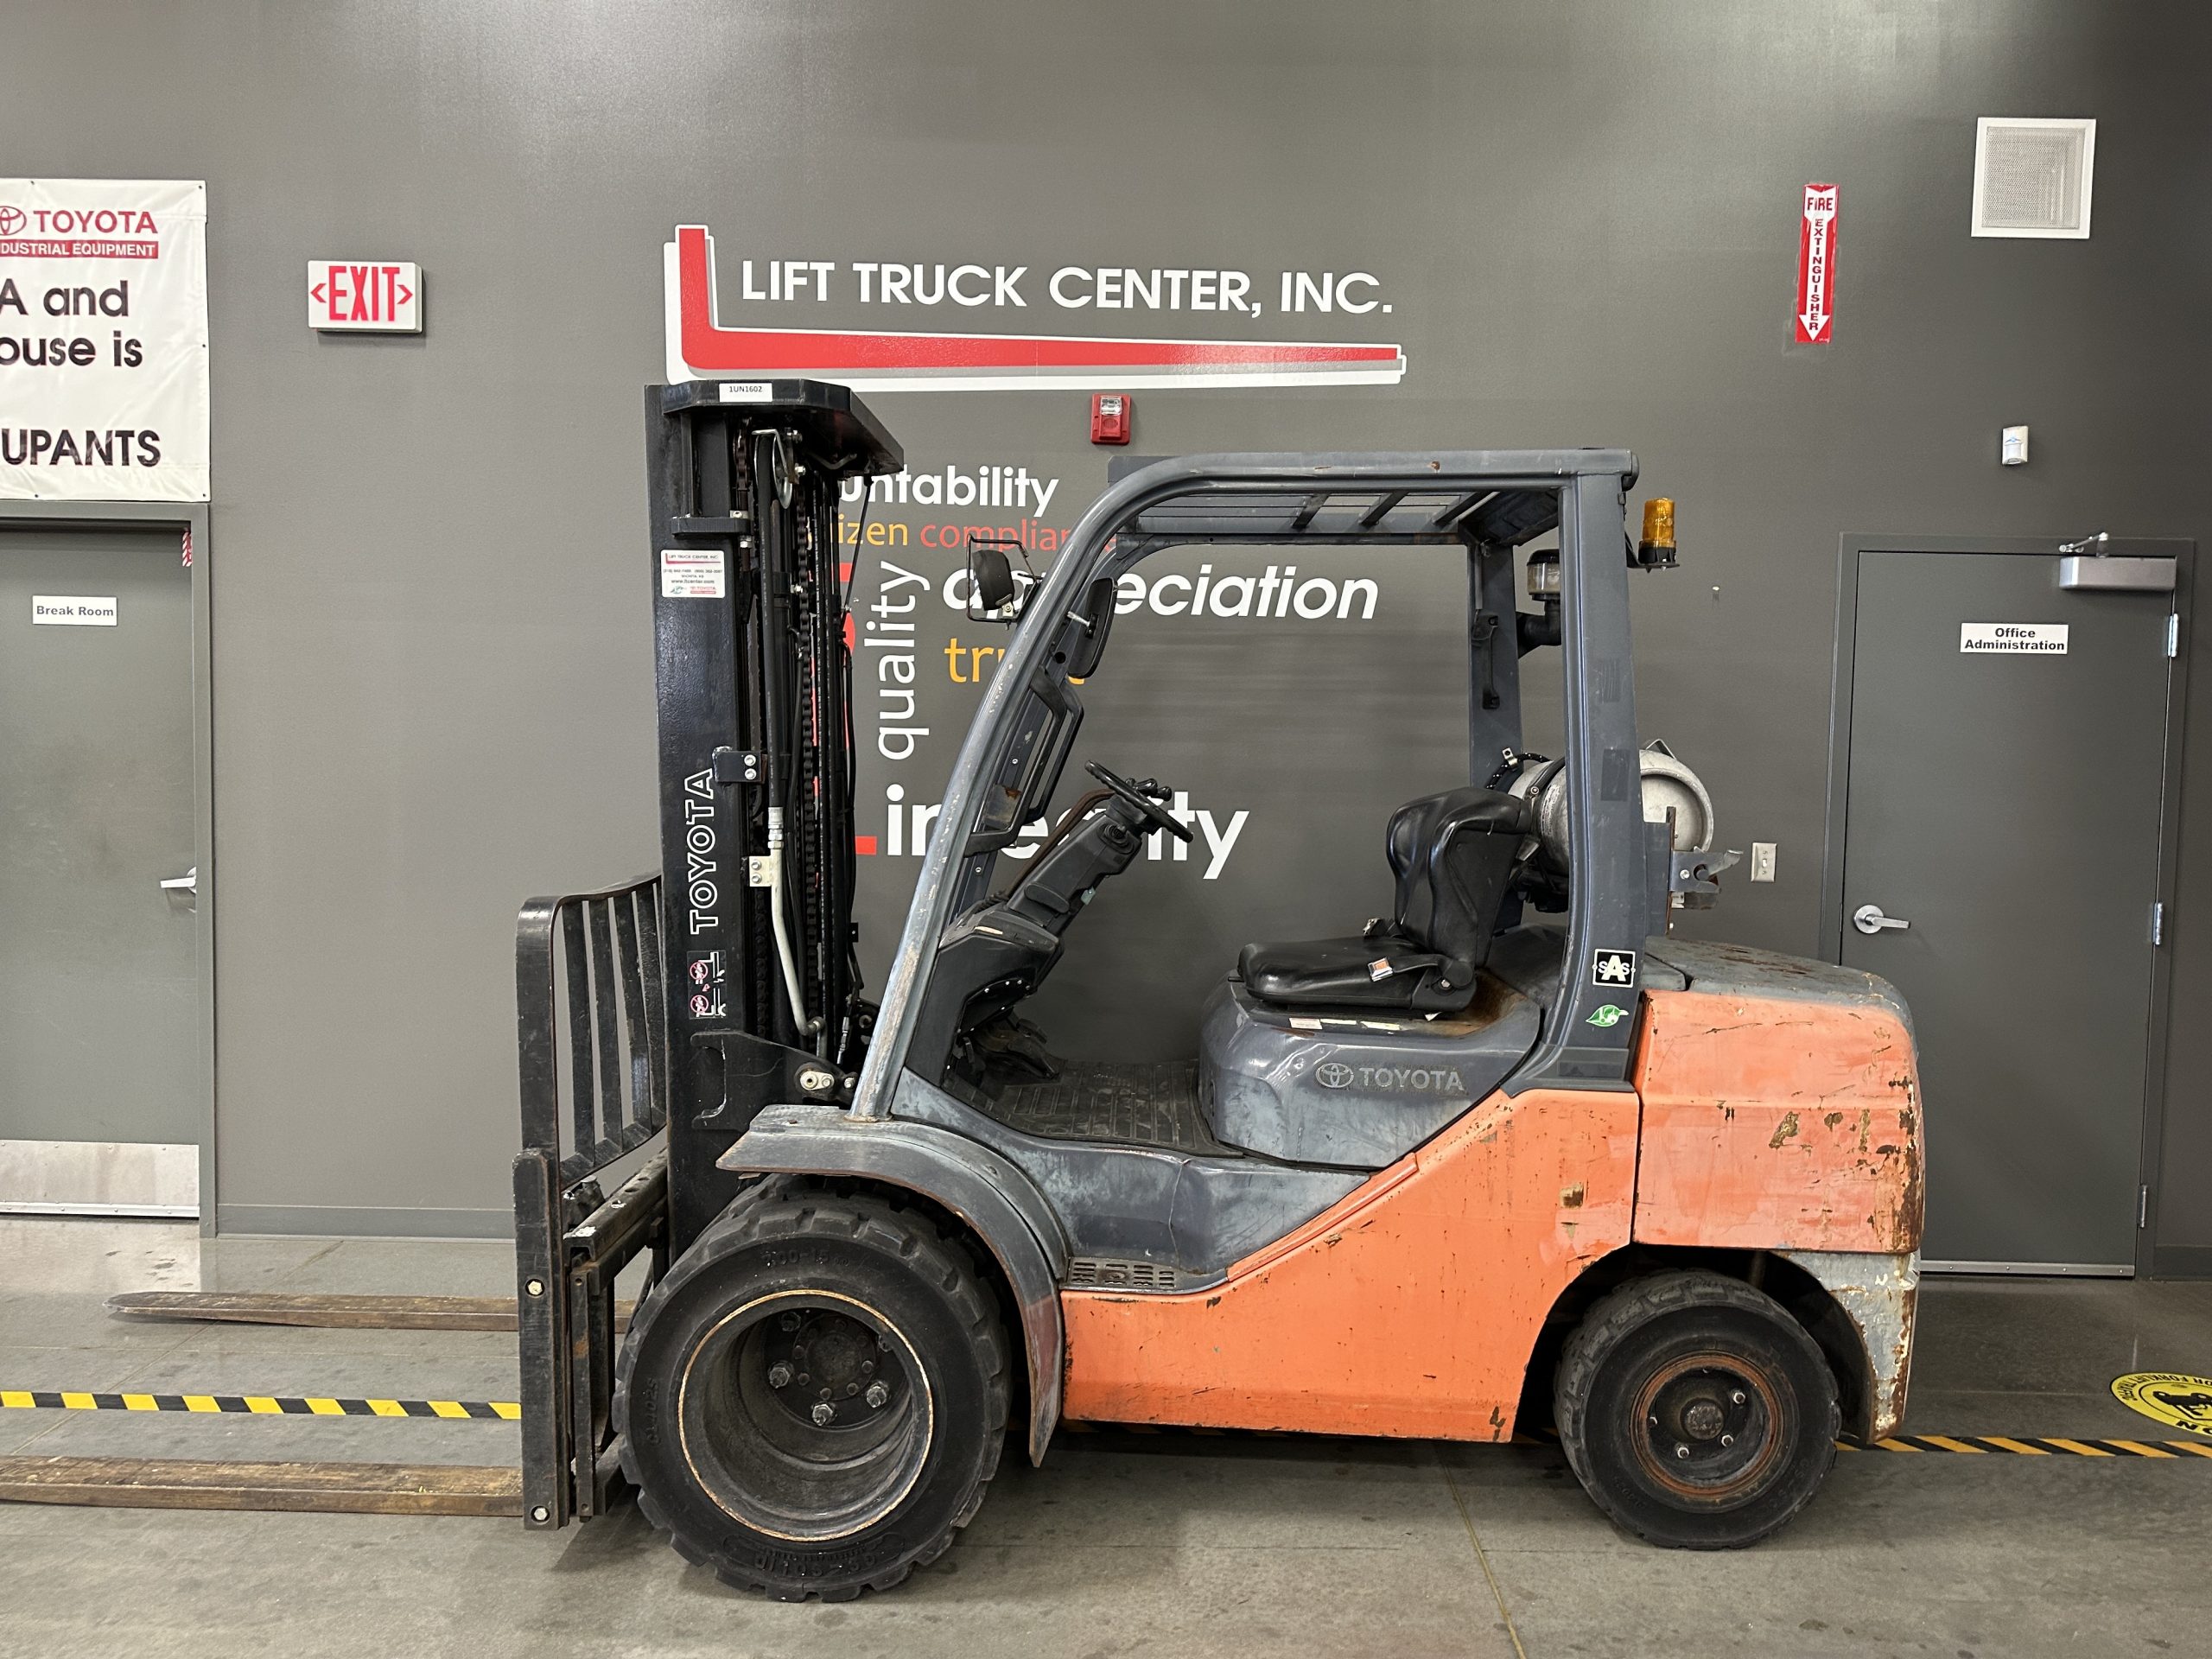 Featured image for “TOYOTA 6,500 LBS. CAPACITY PNEUMATIC TIRED FORKLIFT”